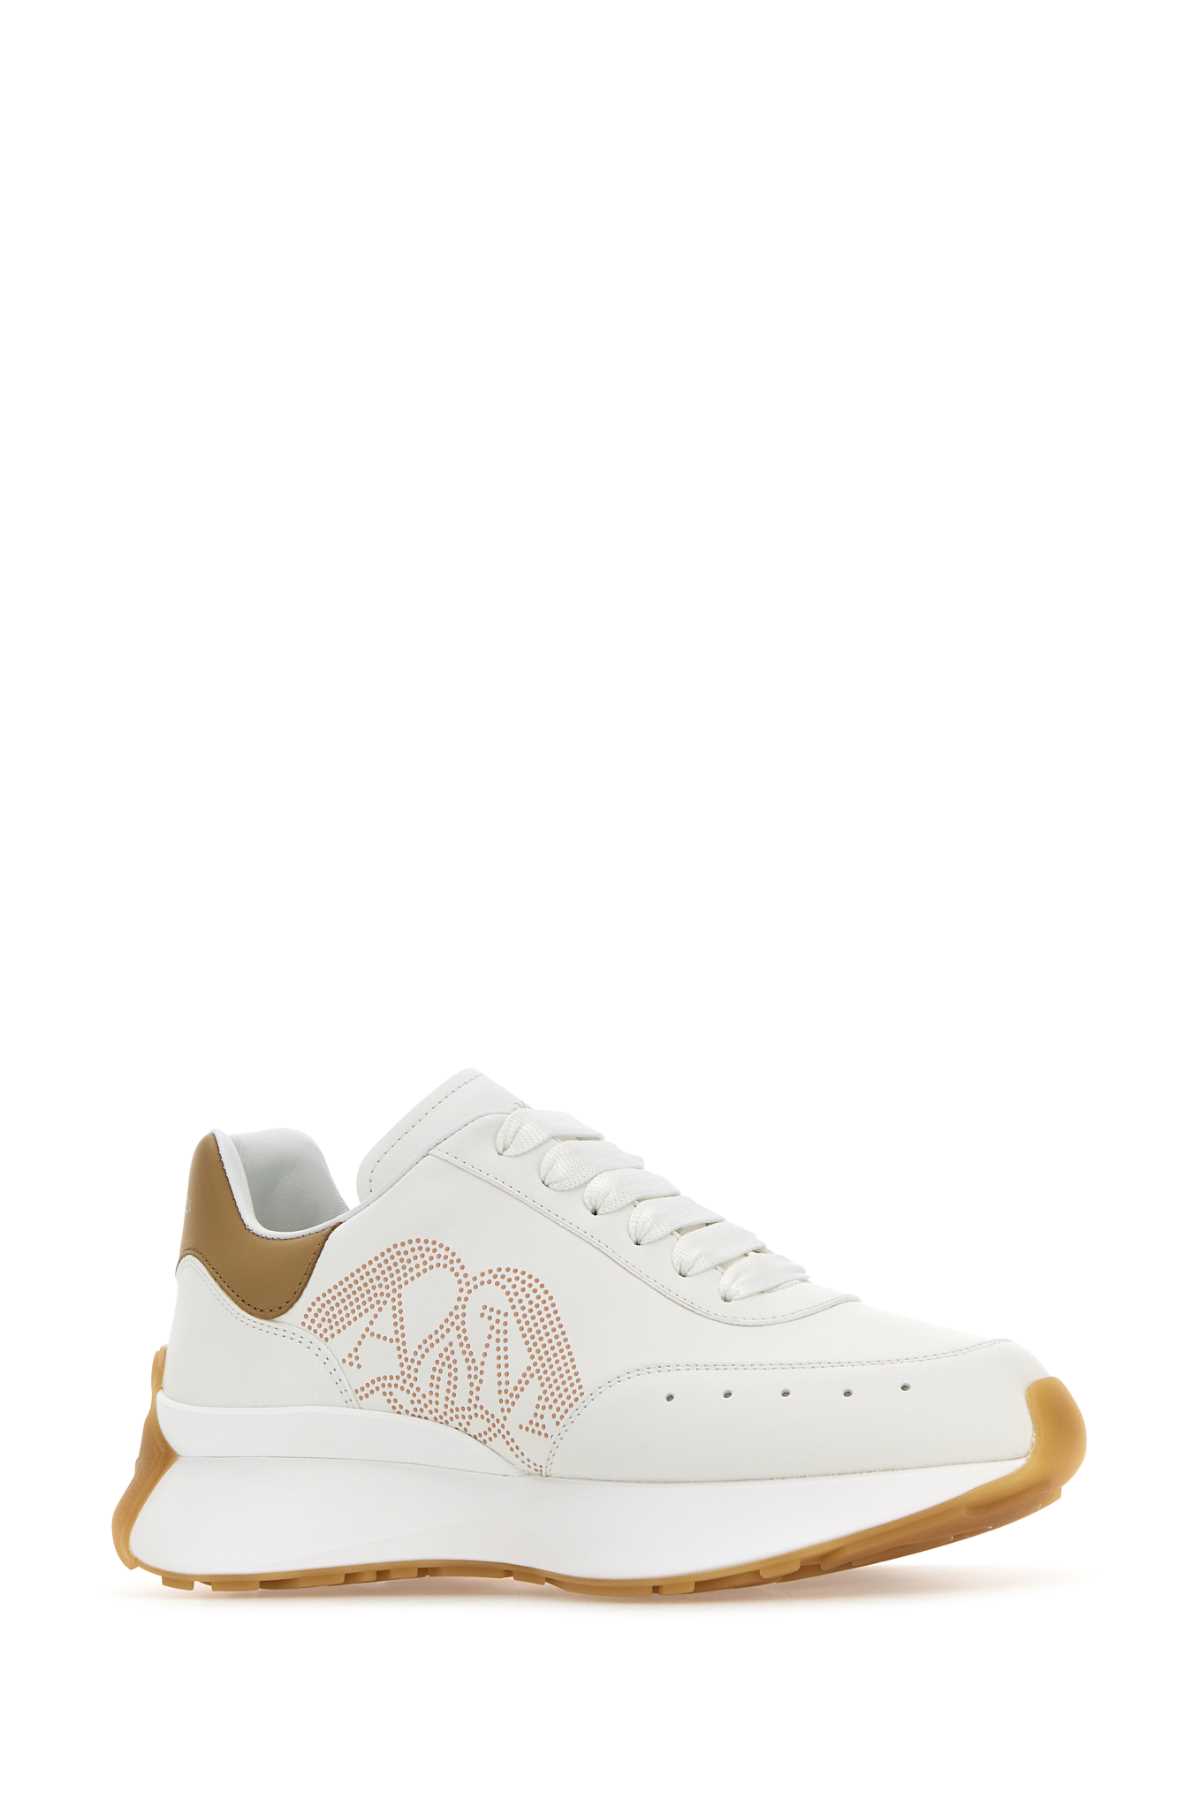 Shop Alexander Mcqueen White Leather Sprint Runner Sneakers In Whitecamelsilamb.